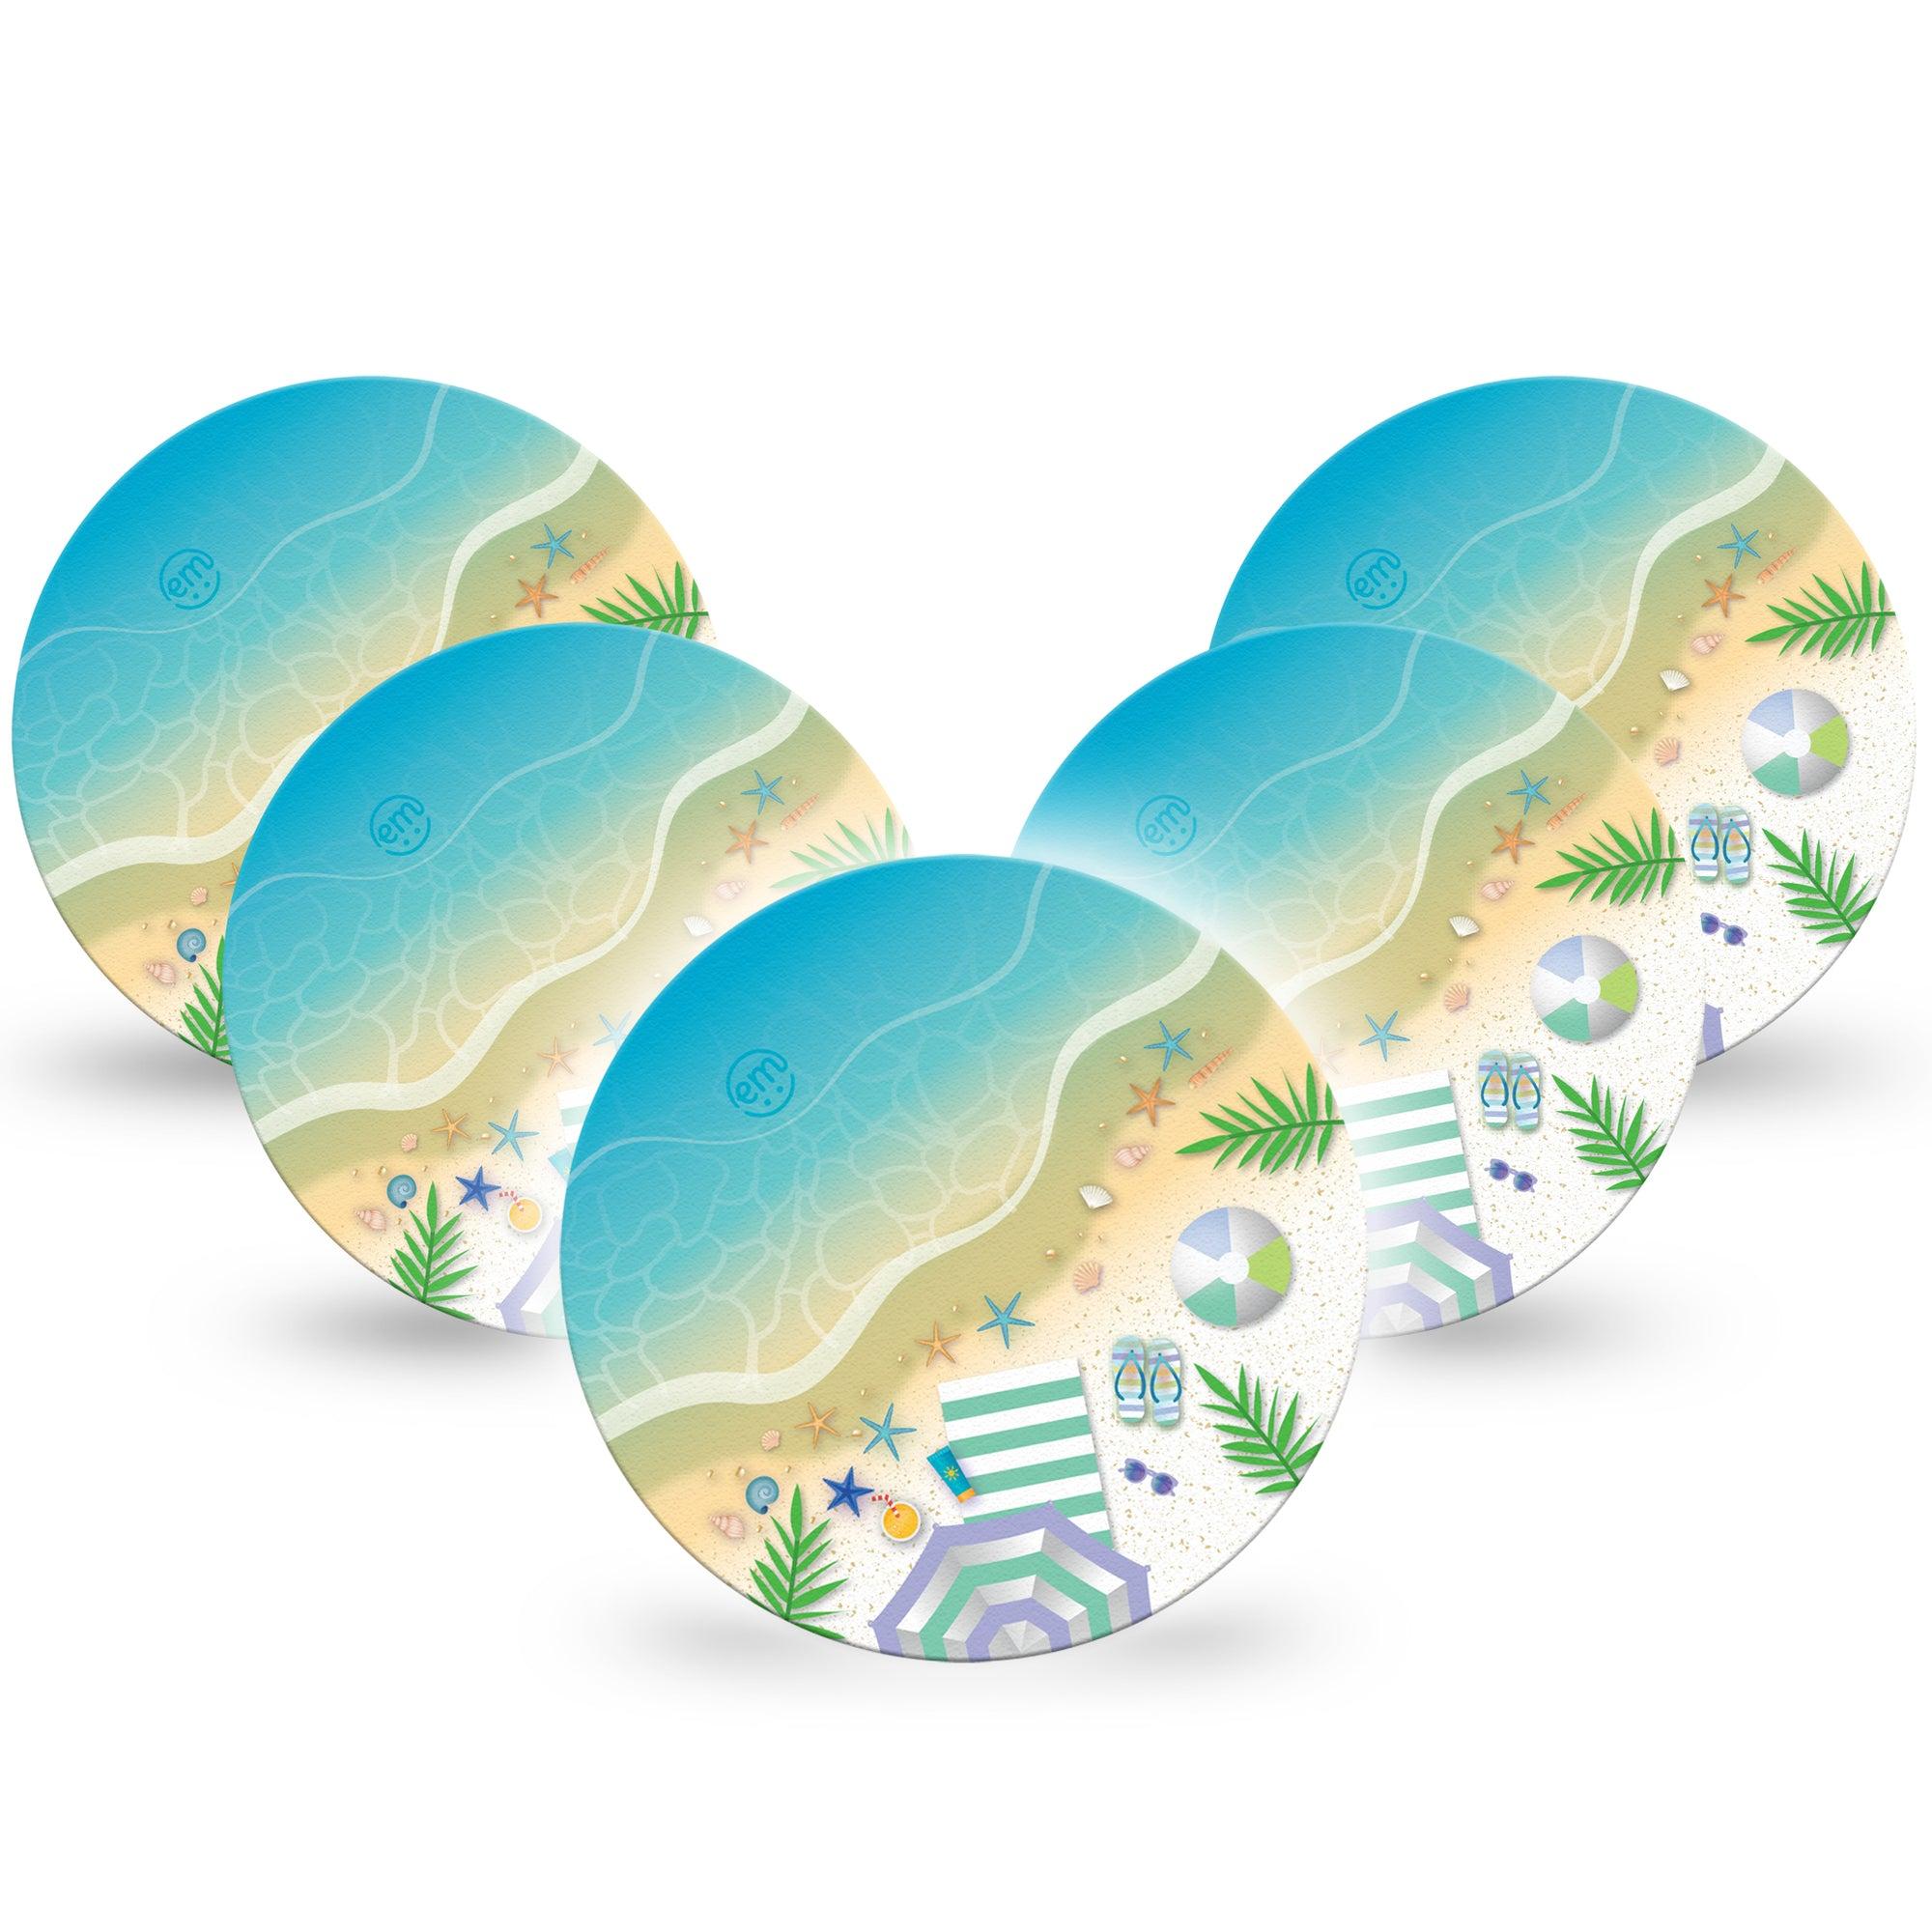 ExpressionMed Relaxing Beach Libre 2 Overpatch, 5-Pack, Beach Umbrella And Flipflops Themed, CGM Overlay Tape Design